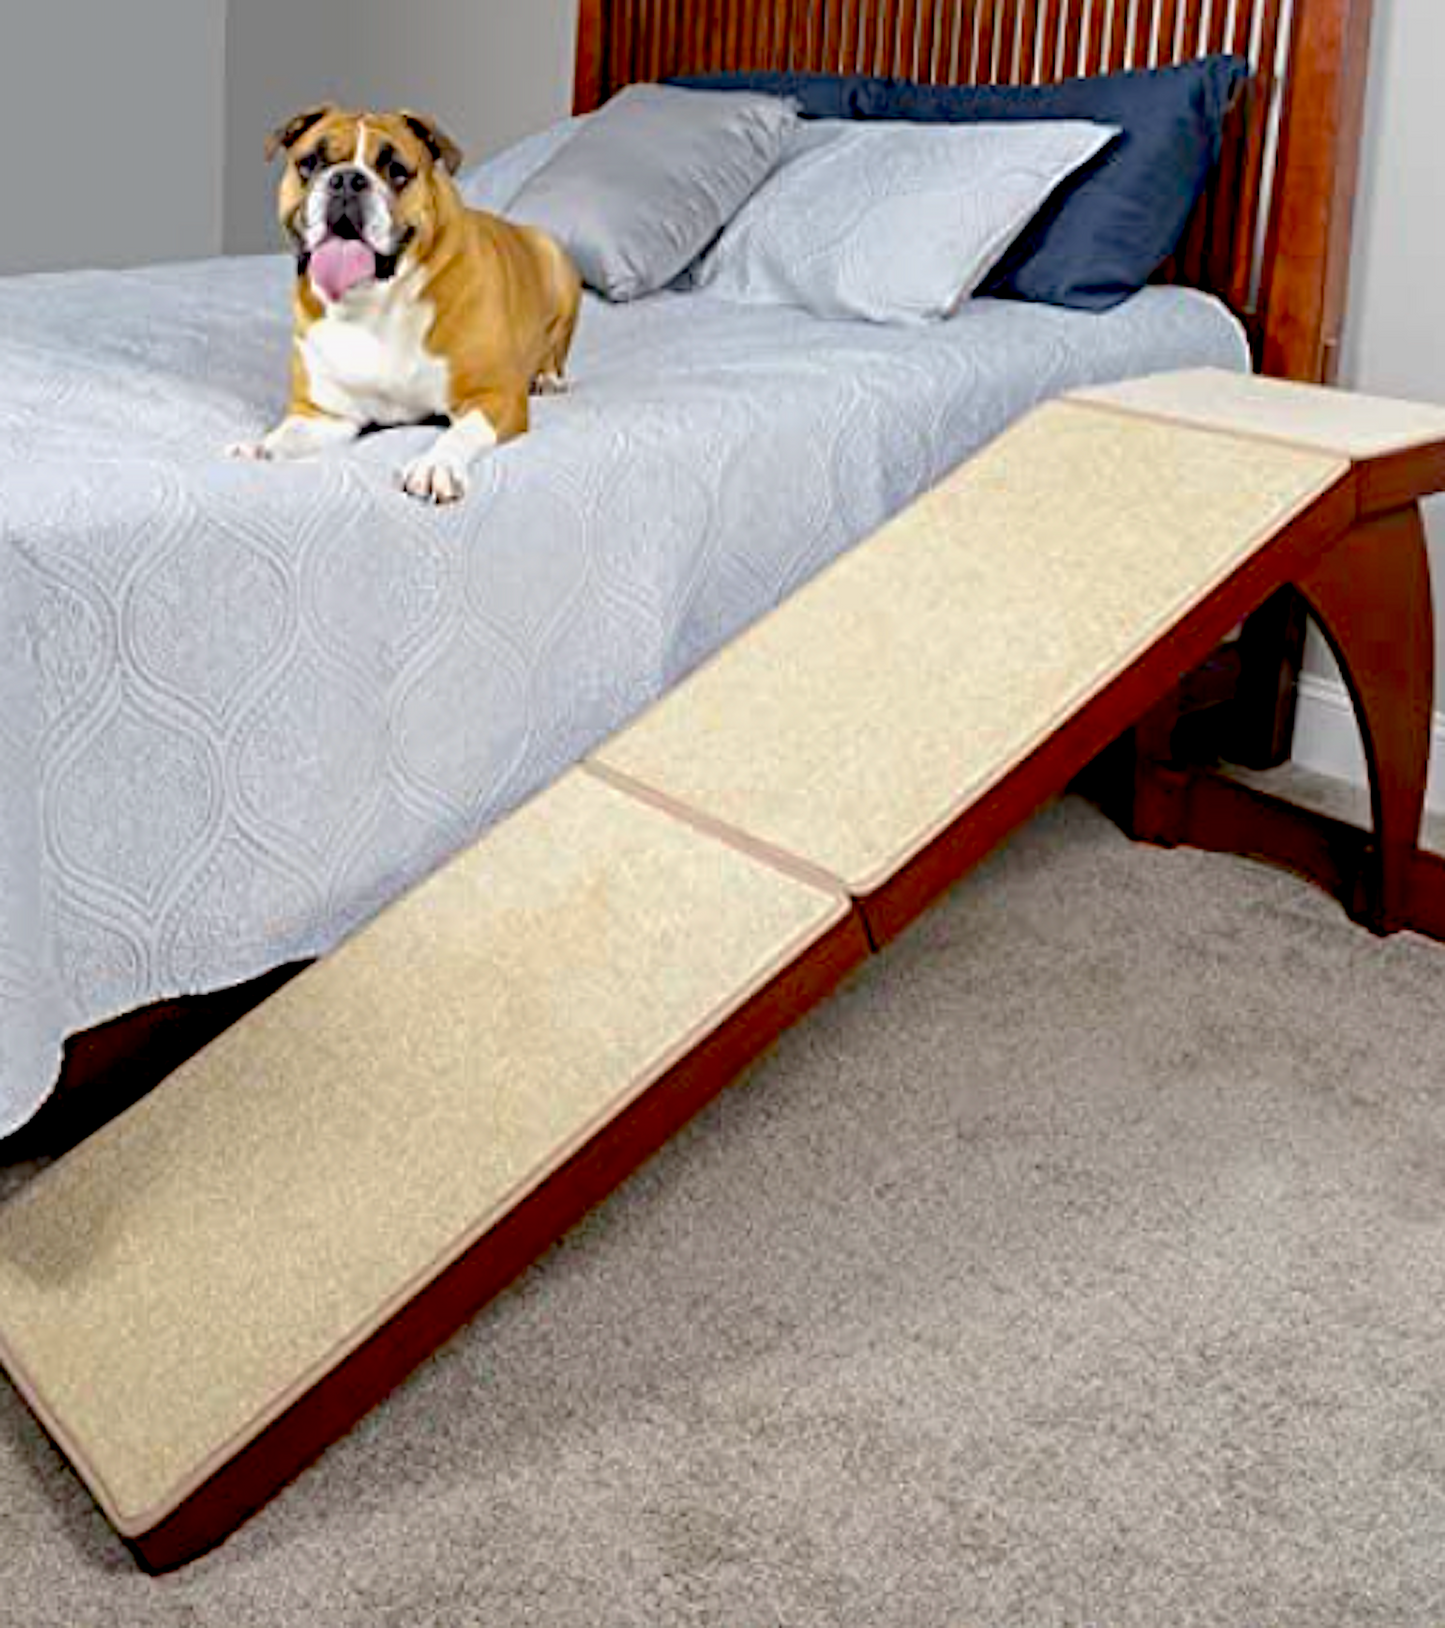 PETSAFE BED RAMP: high-grade wood and carpeted ramp holds up to 120lbs